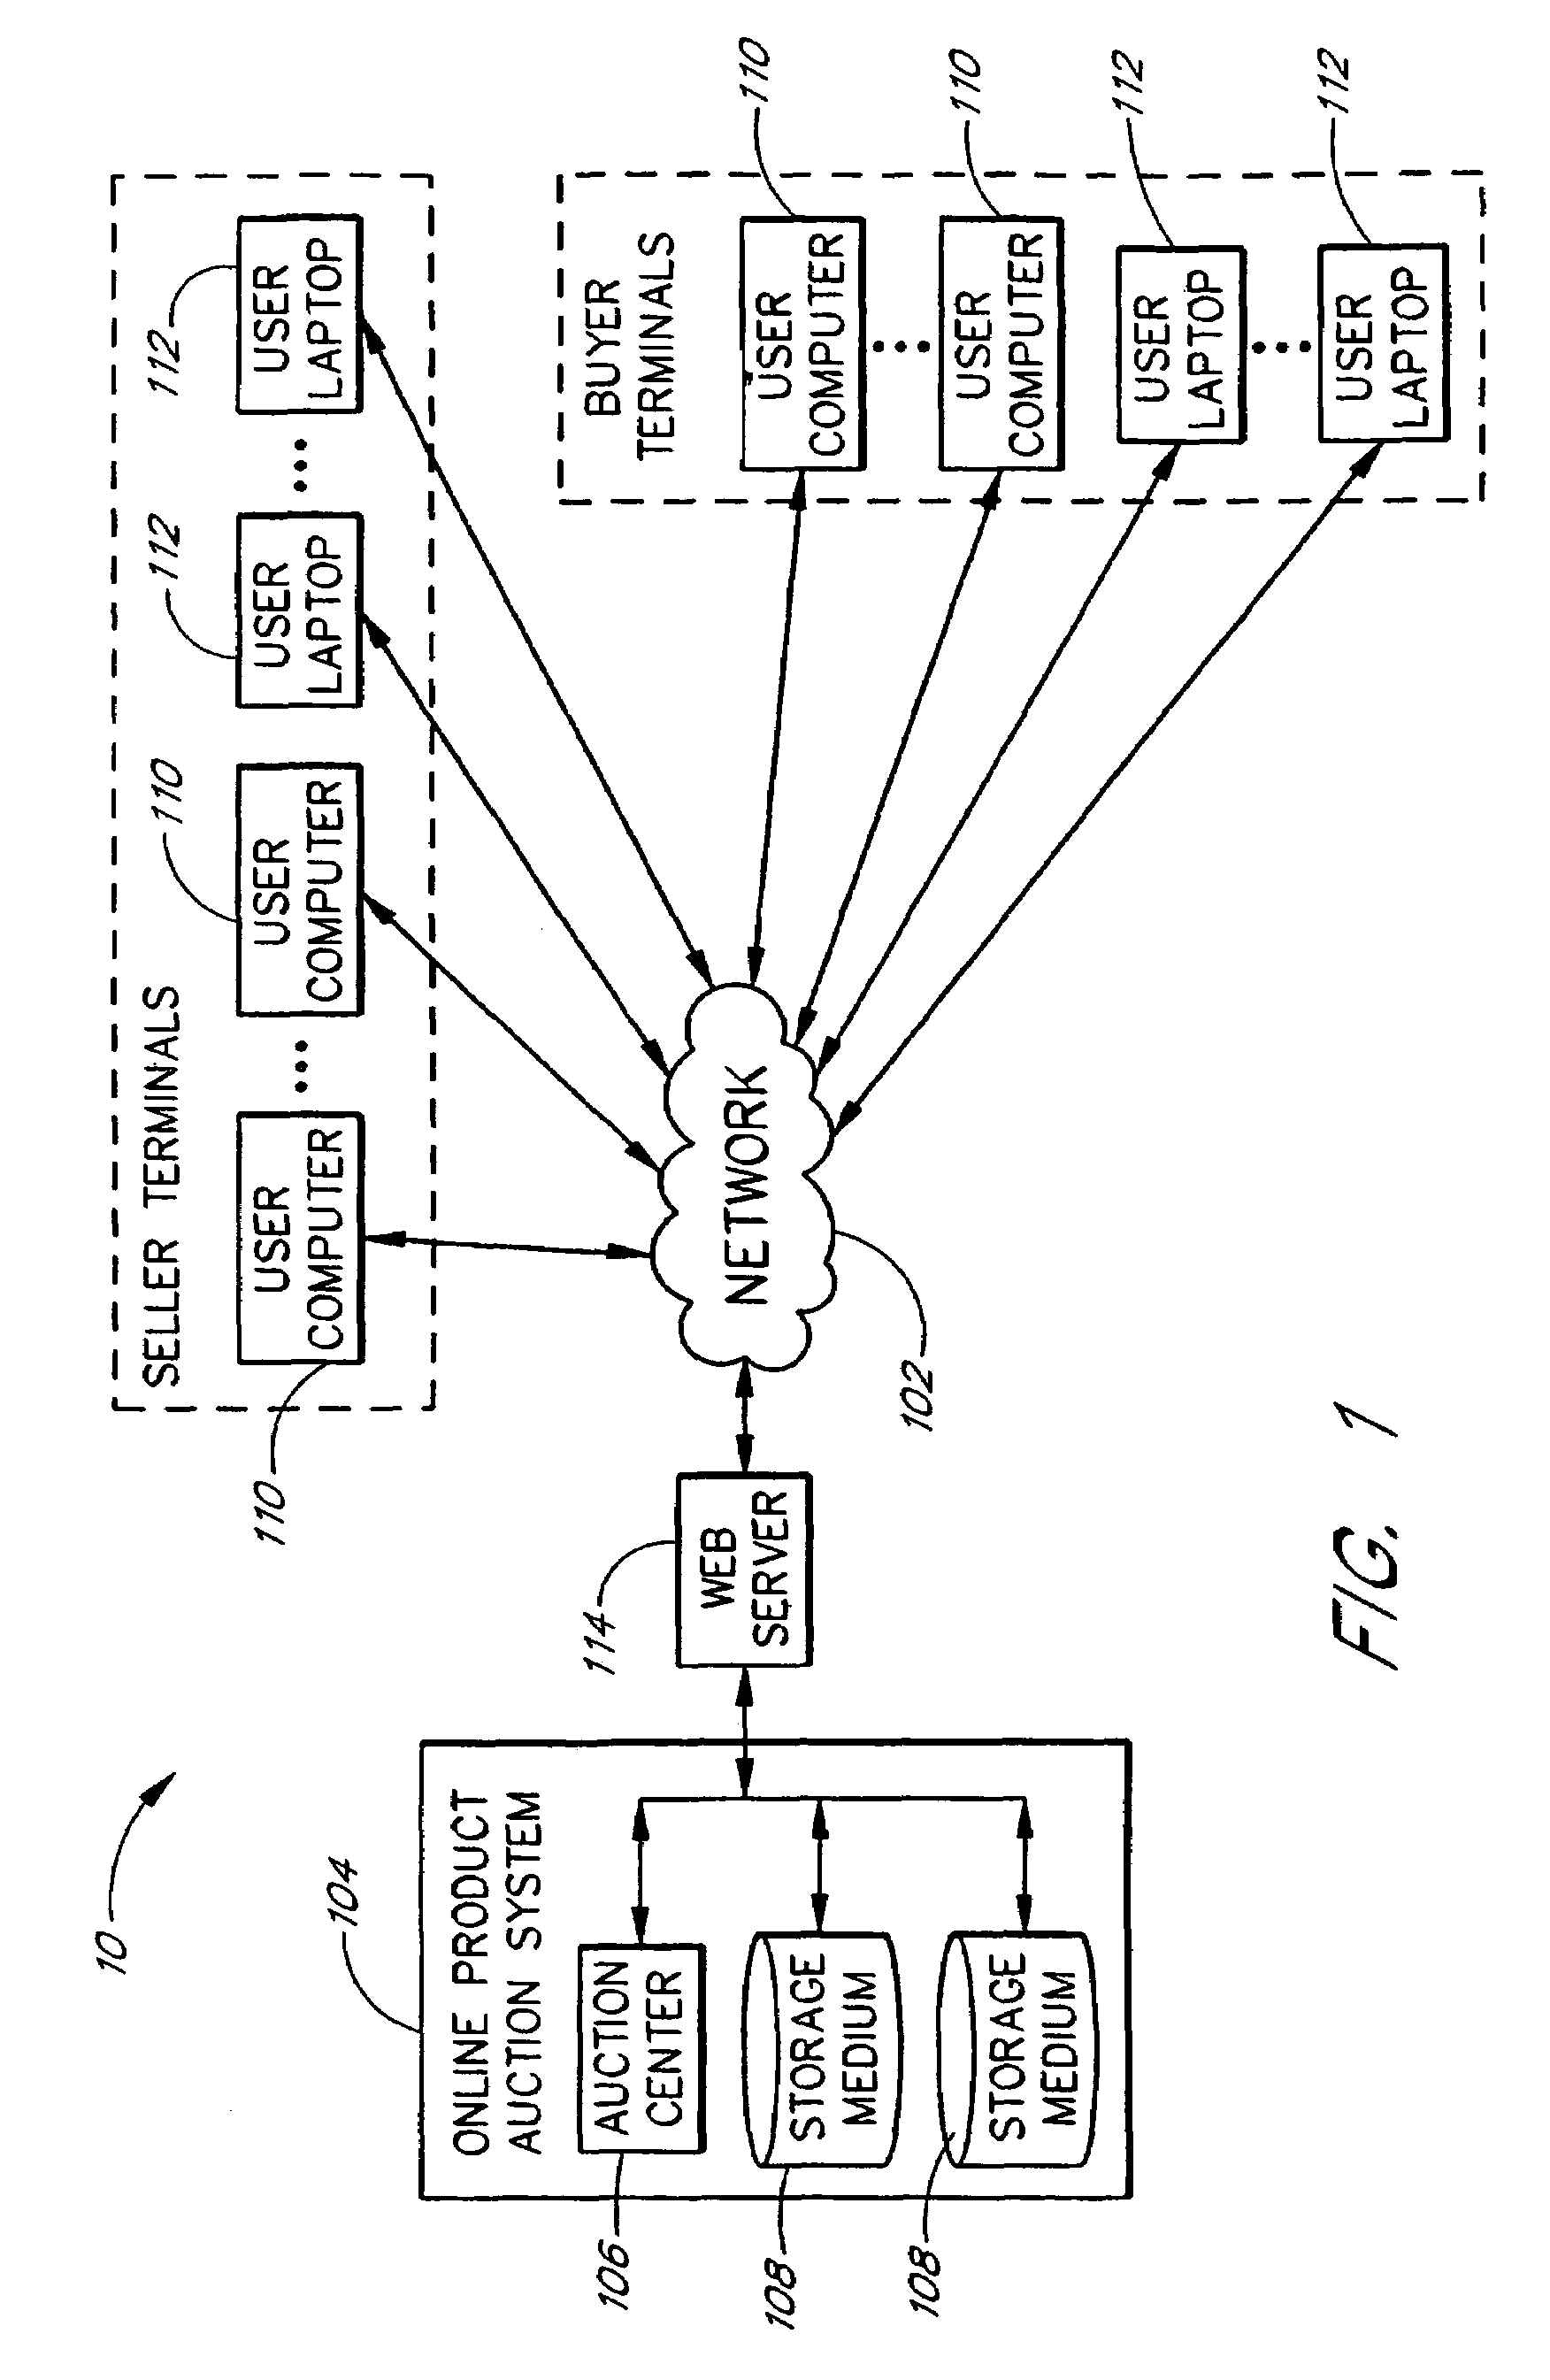 Continuous online auction system and method